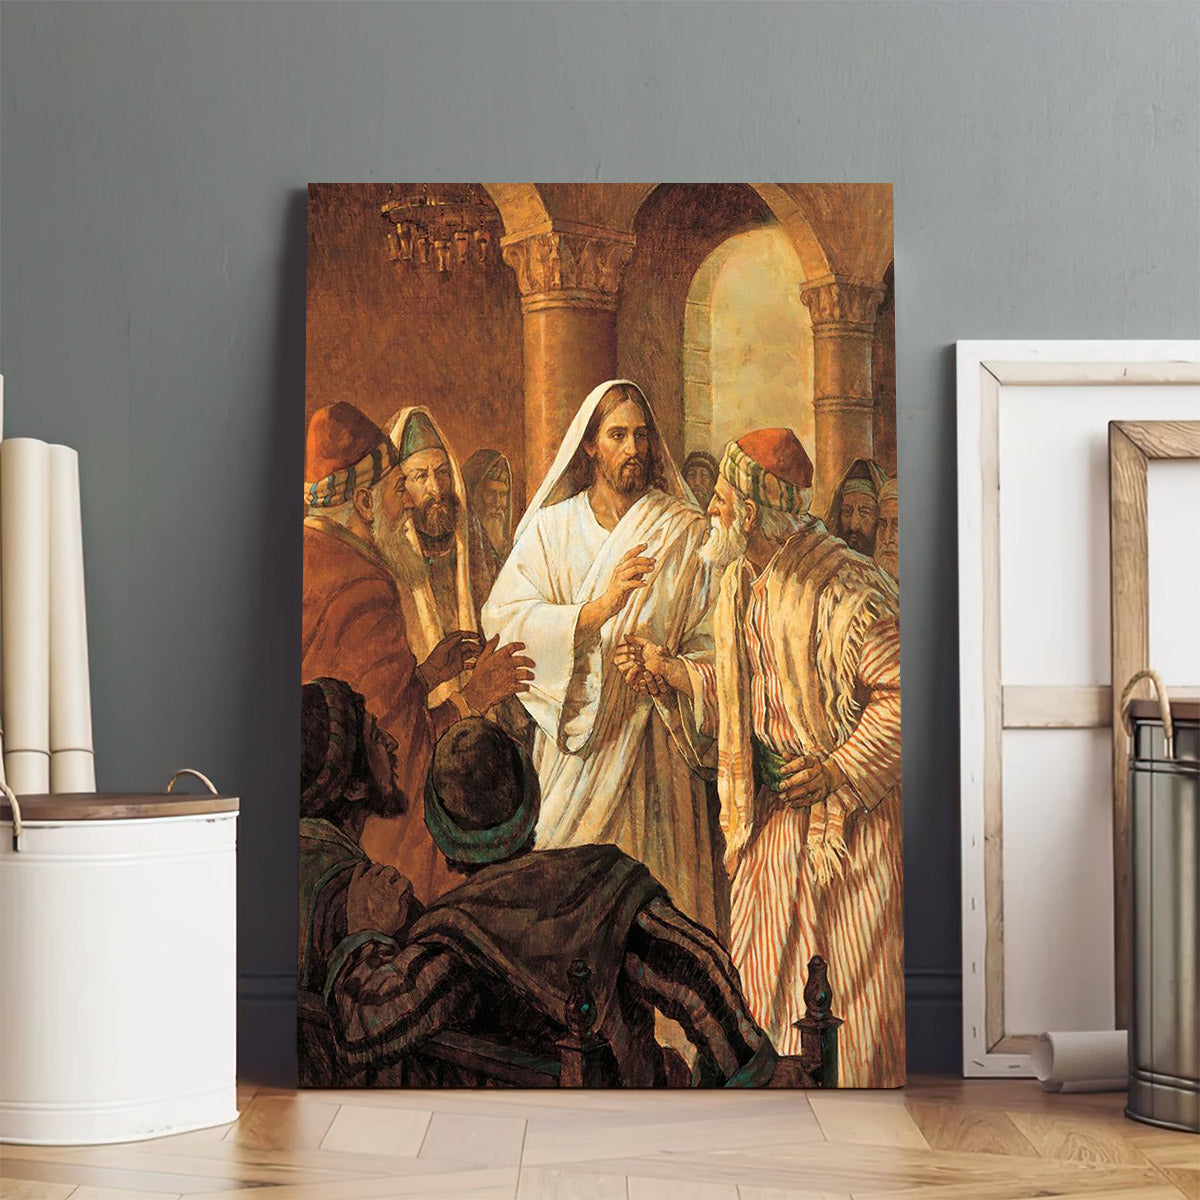 Christ Healing The Man With The Withered Hand Canvas Pictures - Religious Wall Art Canvas - Christian Paintings For Home